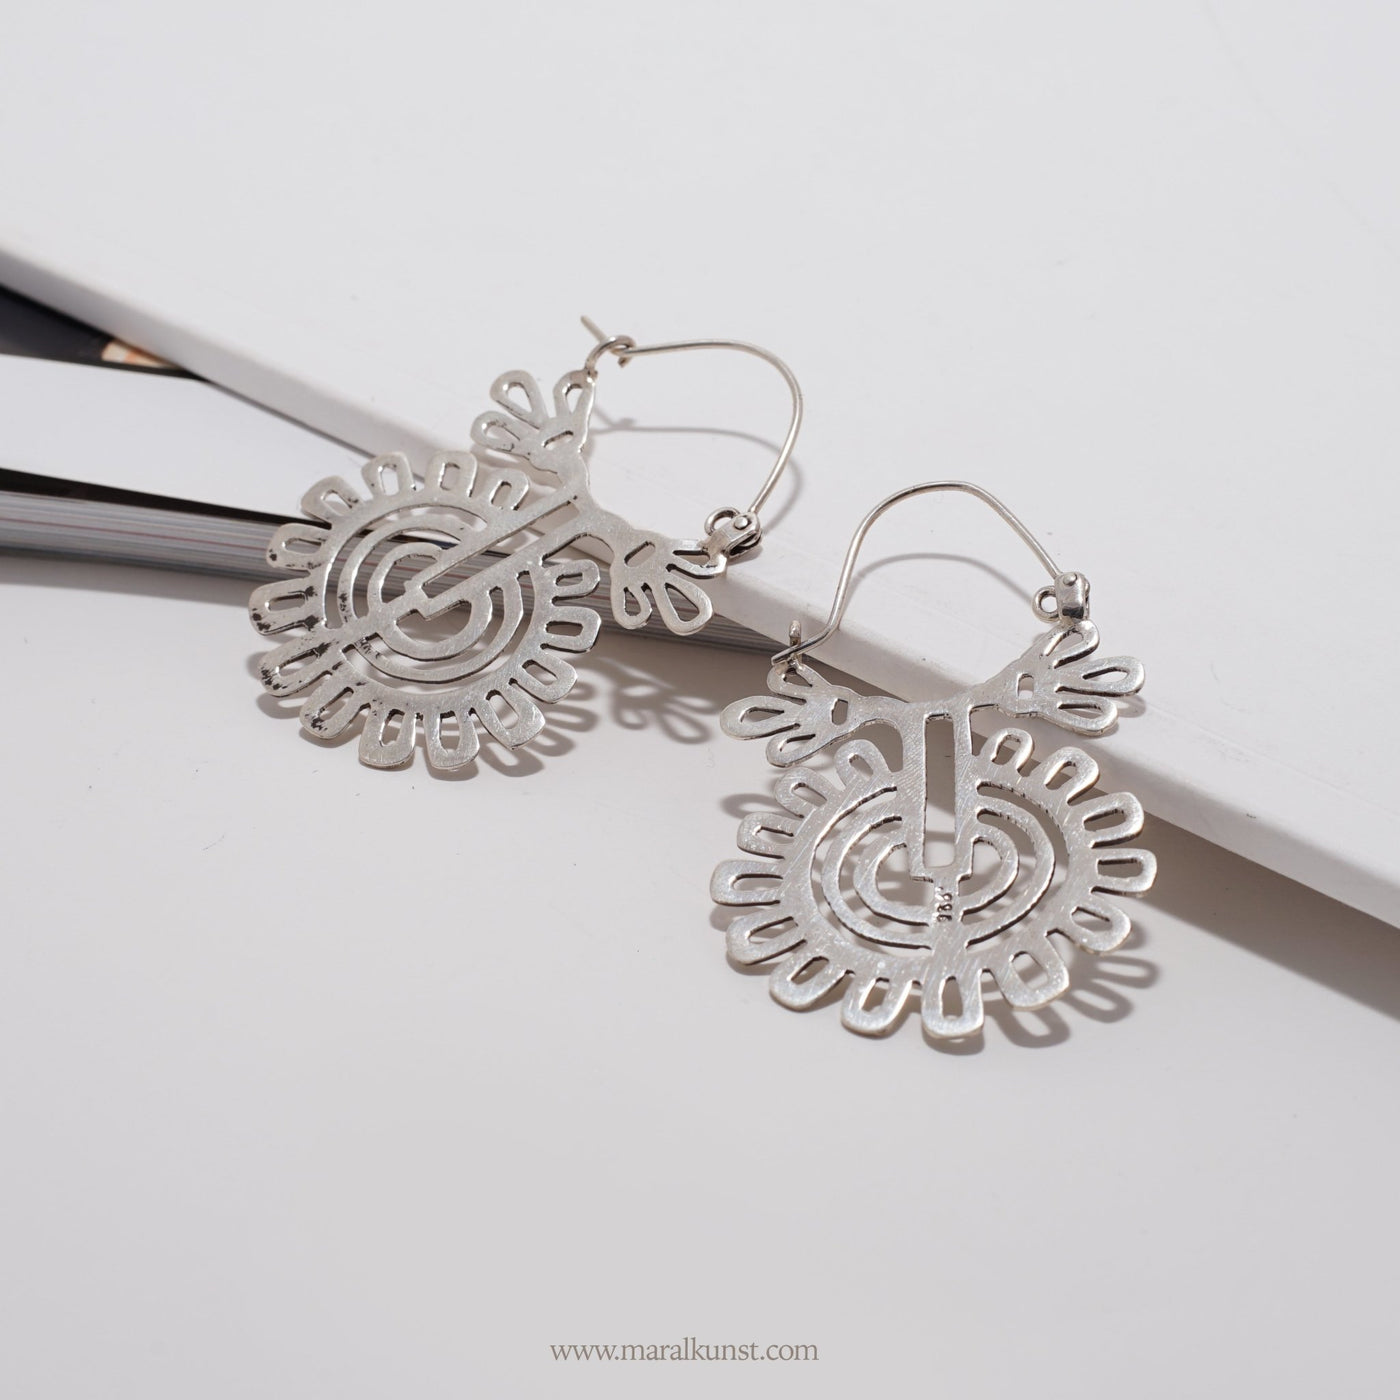 New Mexican Earrings in Silver - Maral Kunst Jewelry